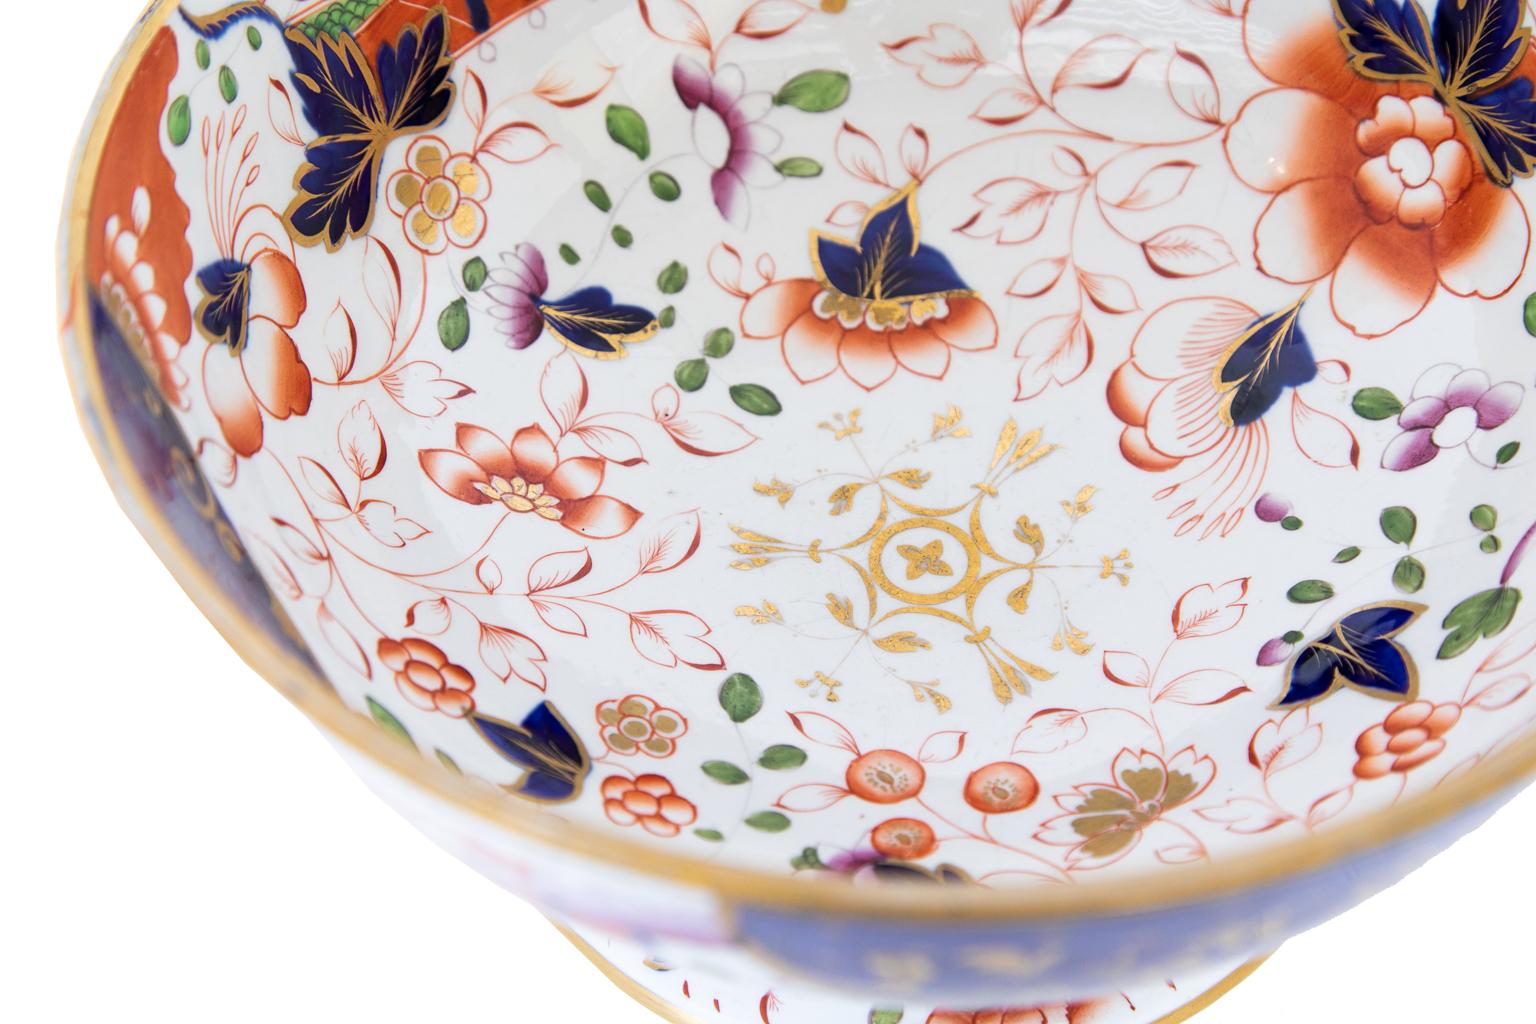 English stone China footed punch bowl, marked Davenport Stone China, Longport , Staffordshire. The floral pattern is red, white, blue, and green mimicking Japanese Imari. The colors are very bold with strong gilt highlights.
  